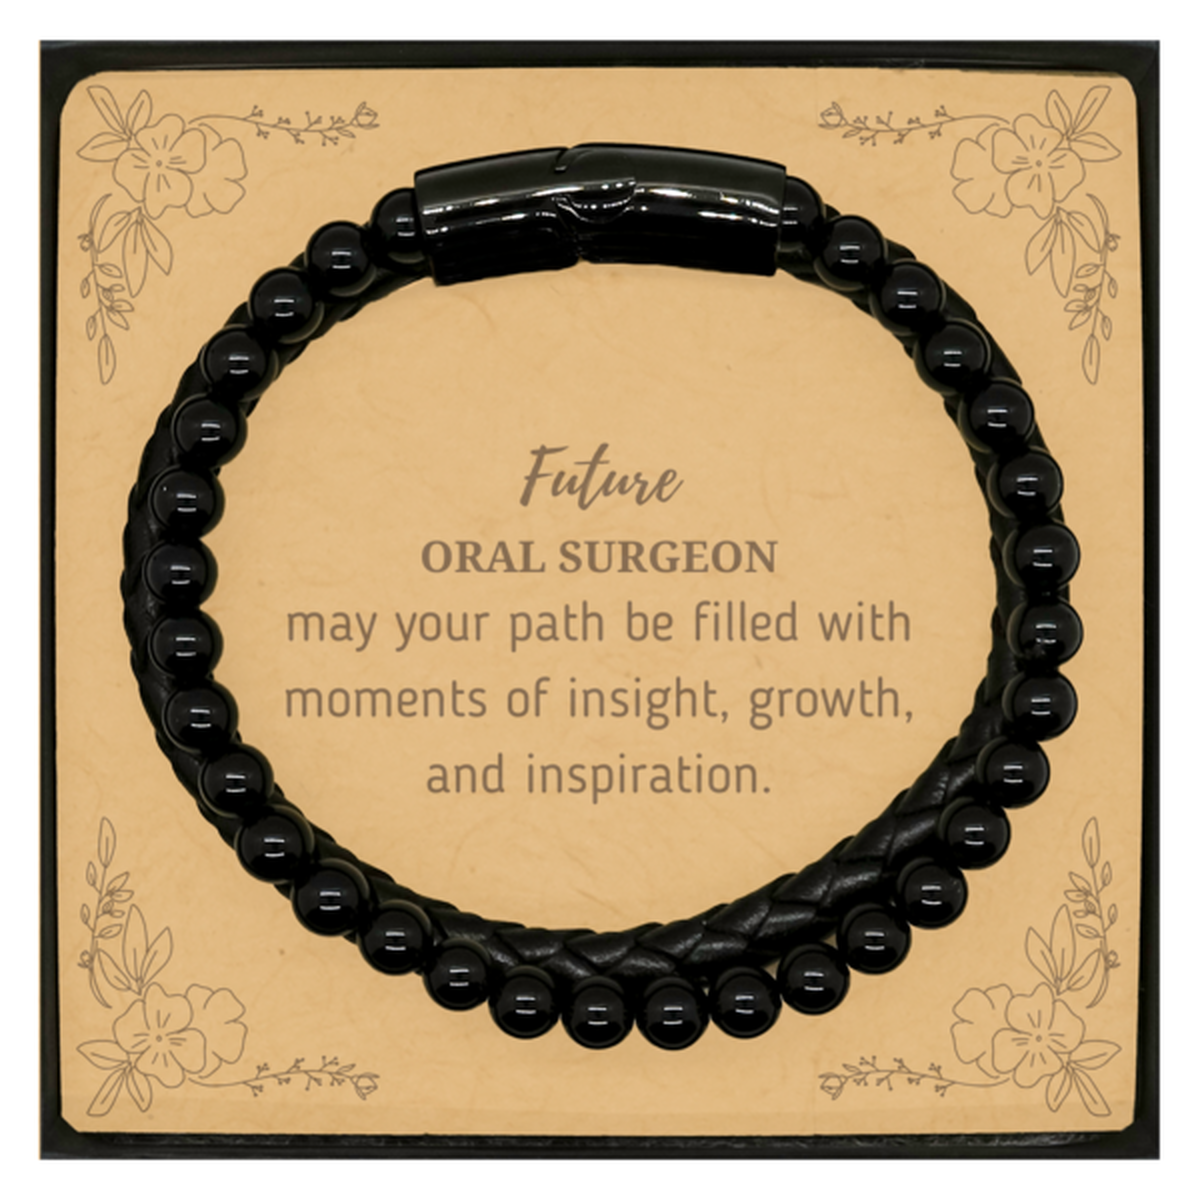 Future Oral Surgeon Gifts, May your path be filled with moments of insight, Graduation Gifts for New Oral Surgeon, Christmas Unique Stone Leather Bracelets For Men, Women, Friends